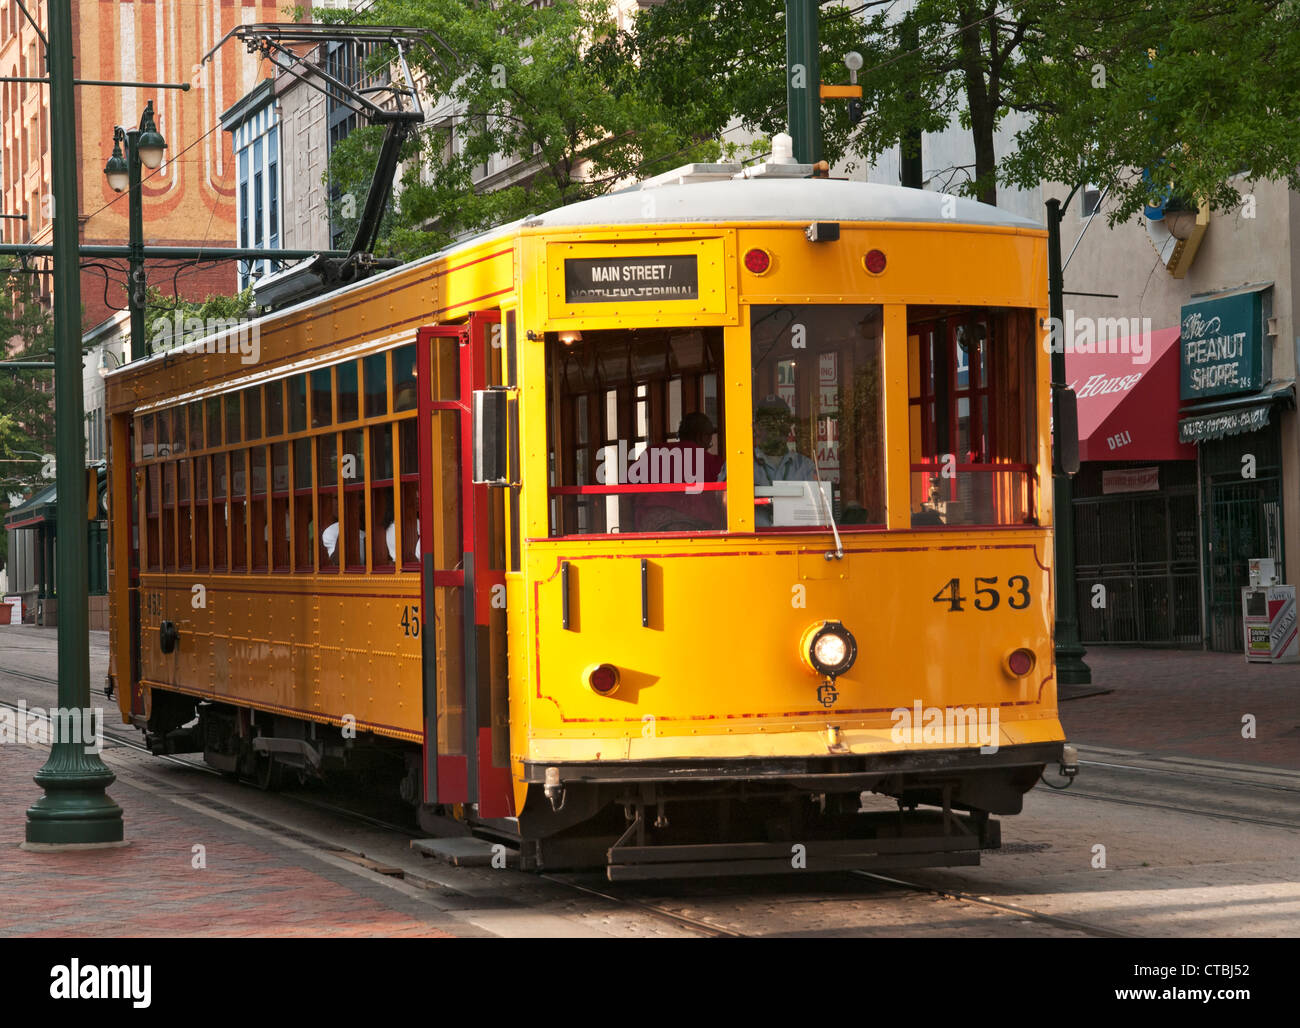 Tennessee, Memphis, Downtown, Main Street, vintage electric trolley car. Stock Photo